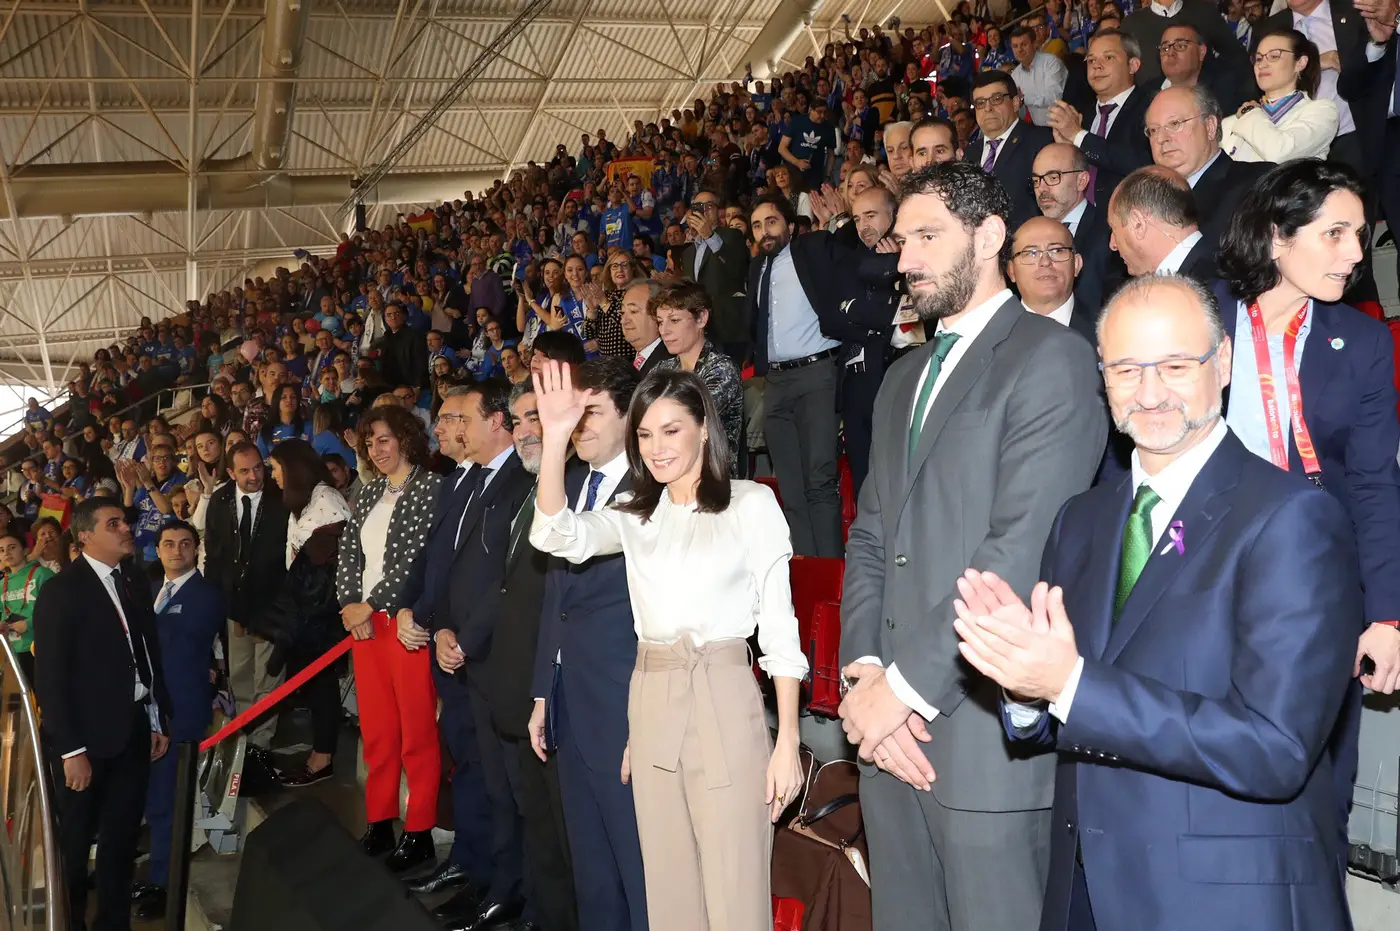 Queen Letizia attended the Basketball Queen Cup in Madrid